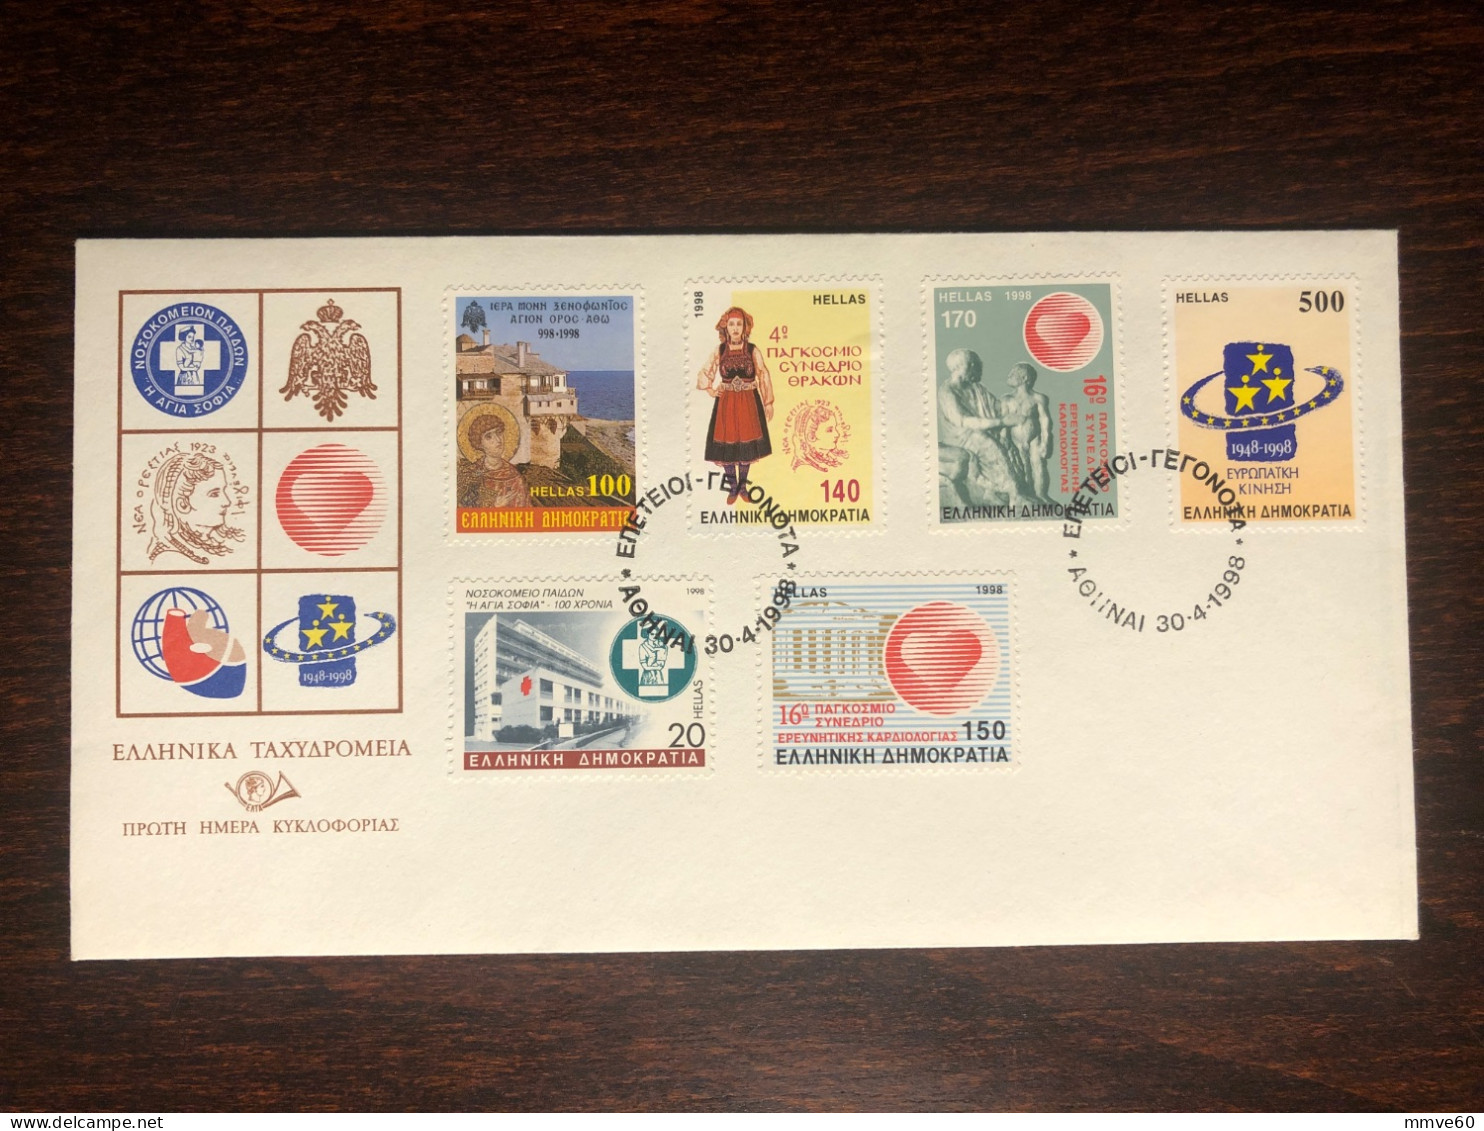 GREECE FDC COVER 1998 YEAR CARDIOLOGY HOSPITAL RED CROSS HEALTH MEDICINE STAMPS - Covers & Documents